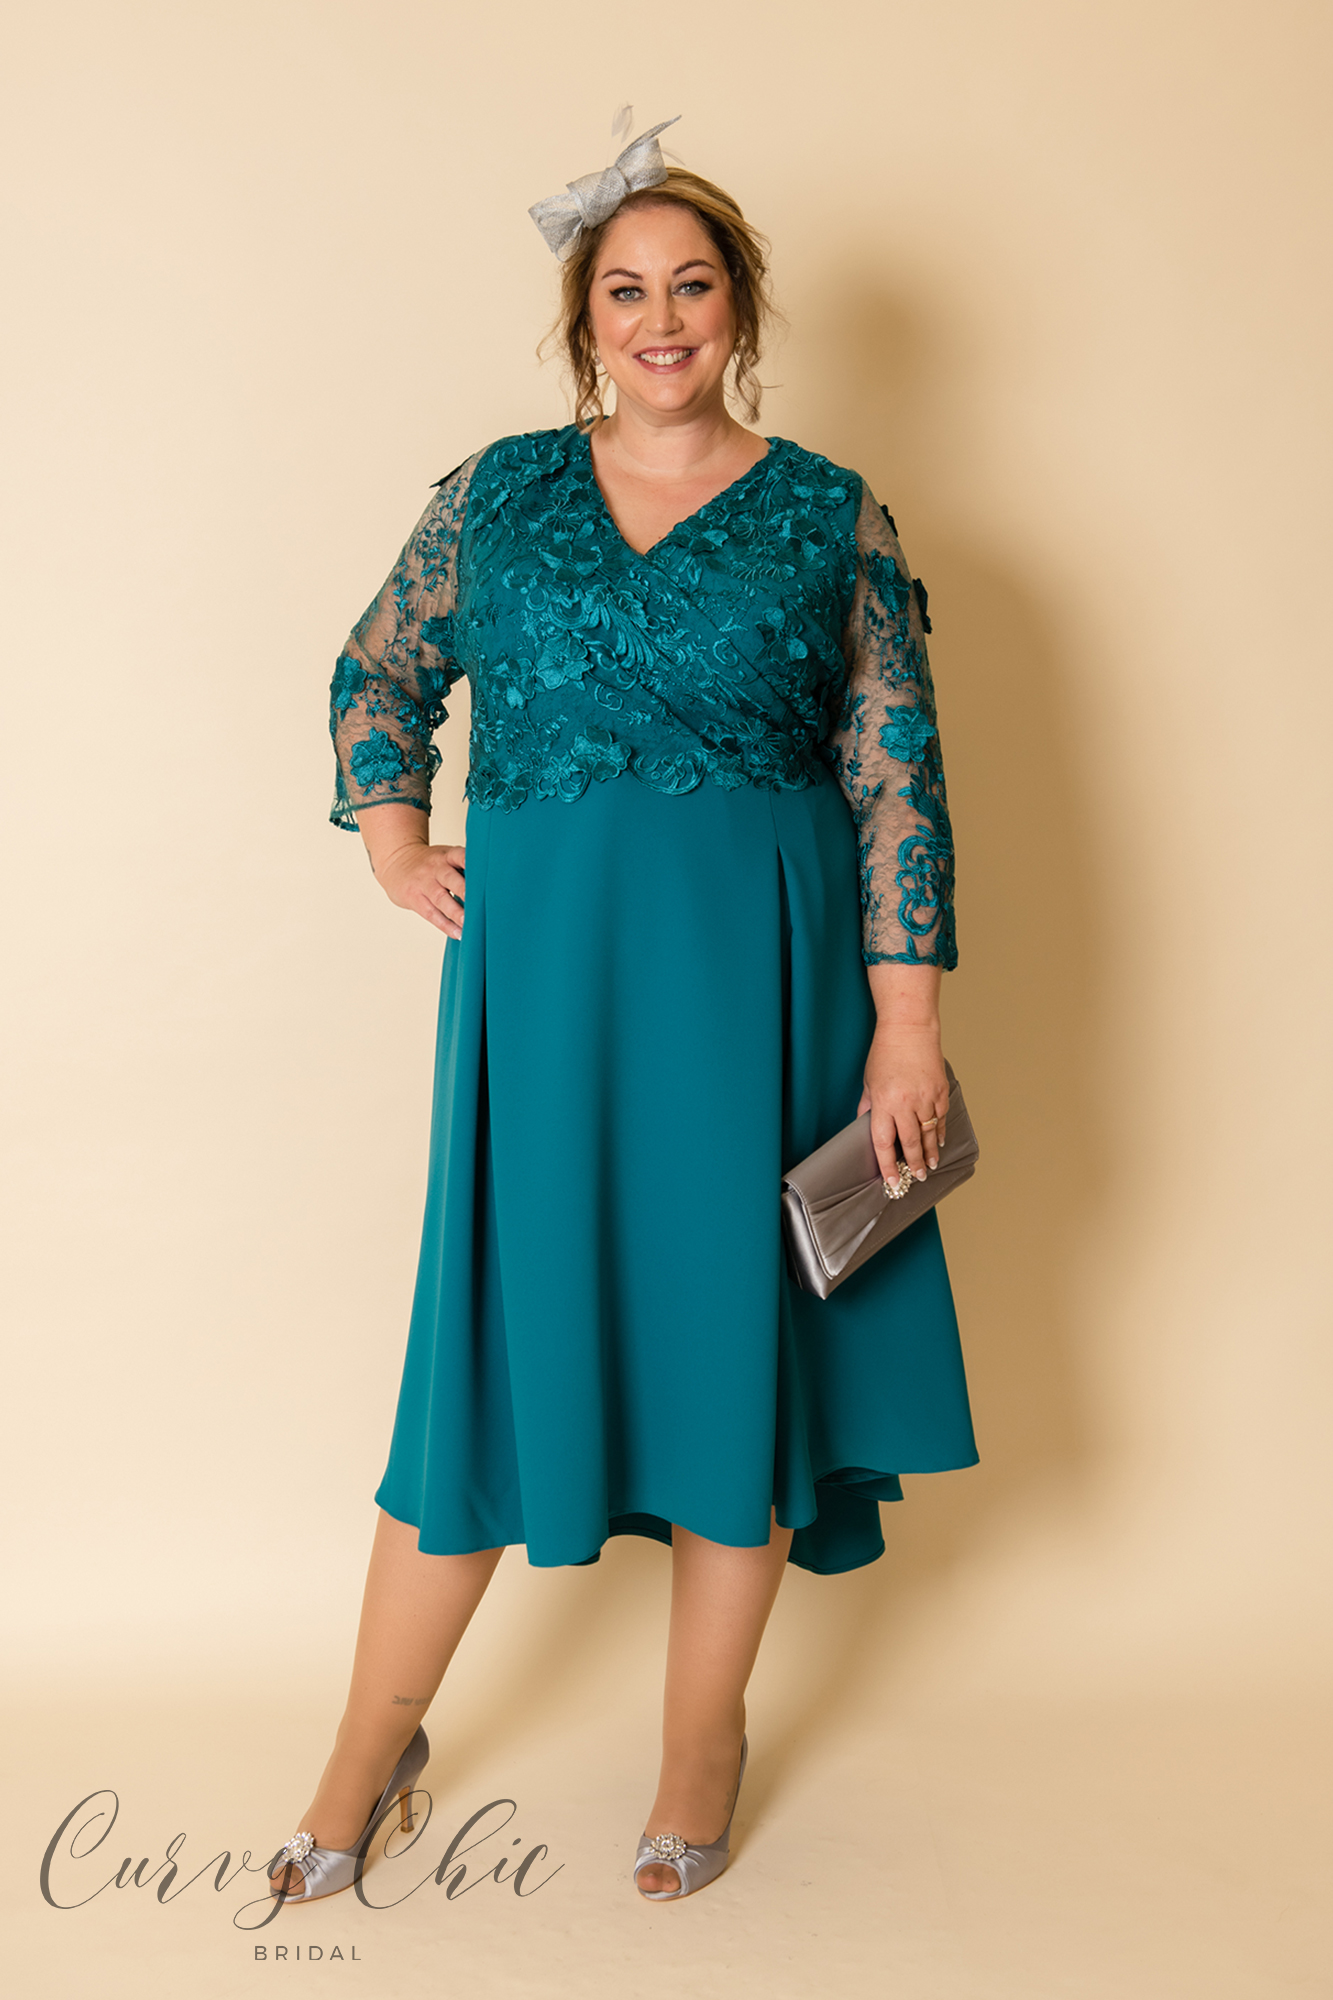 Willow Dress | Teal, Pink, Blue Curvy Bridal | Plus Size of the Bride/Groom